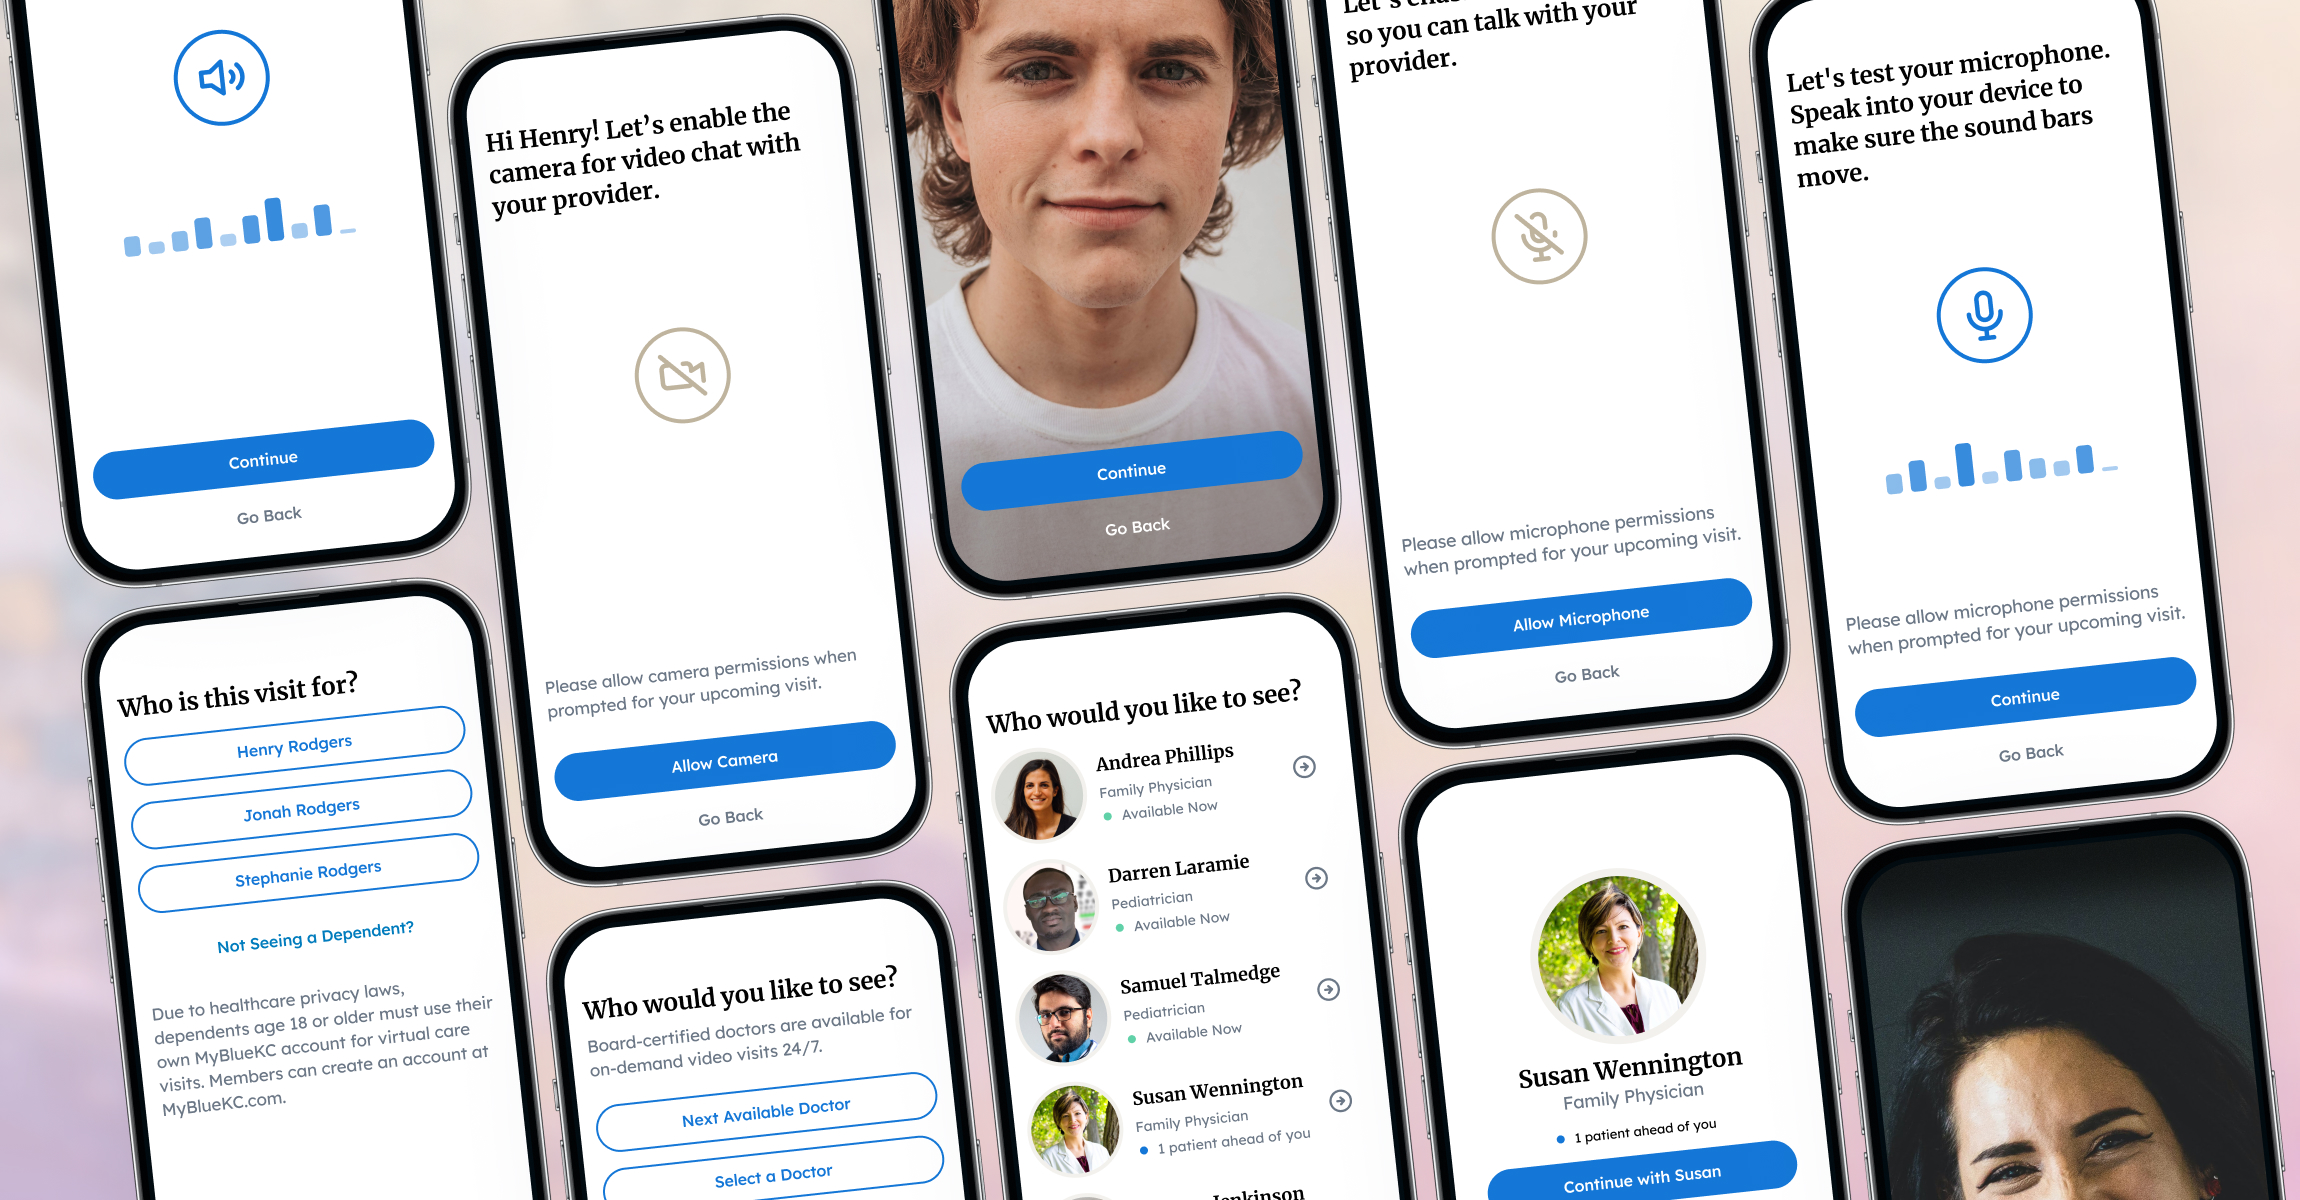 Product design mockups for a health insurance app. Designed by Sean Berger for Blue Cross and Blue Shield.